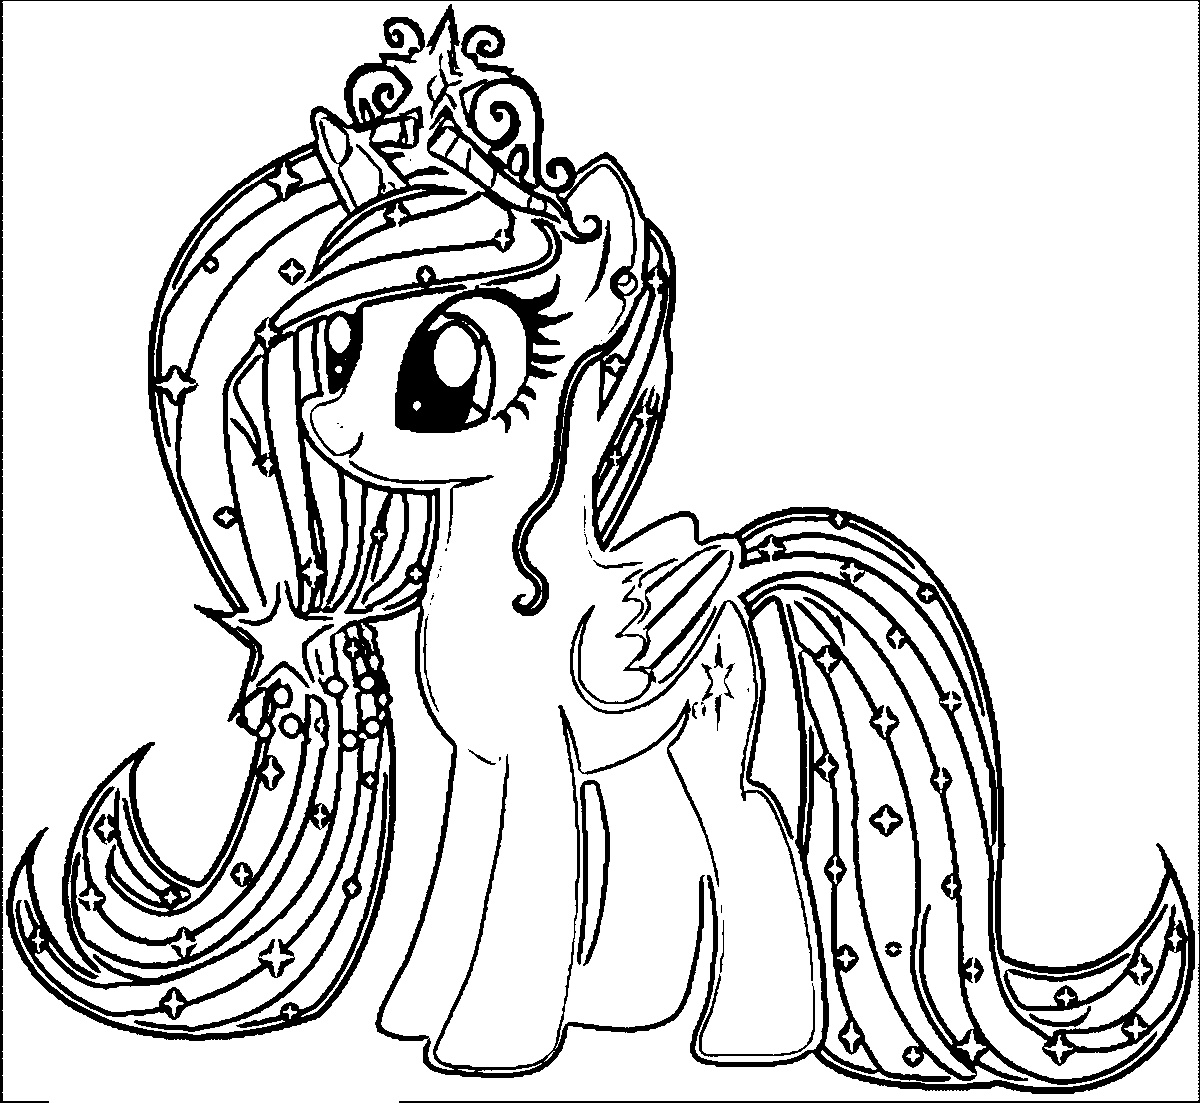 My Little Pony Coloring Pages For Pony Lovers | Educative Printable